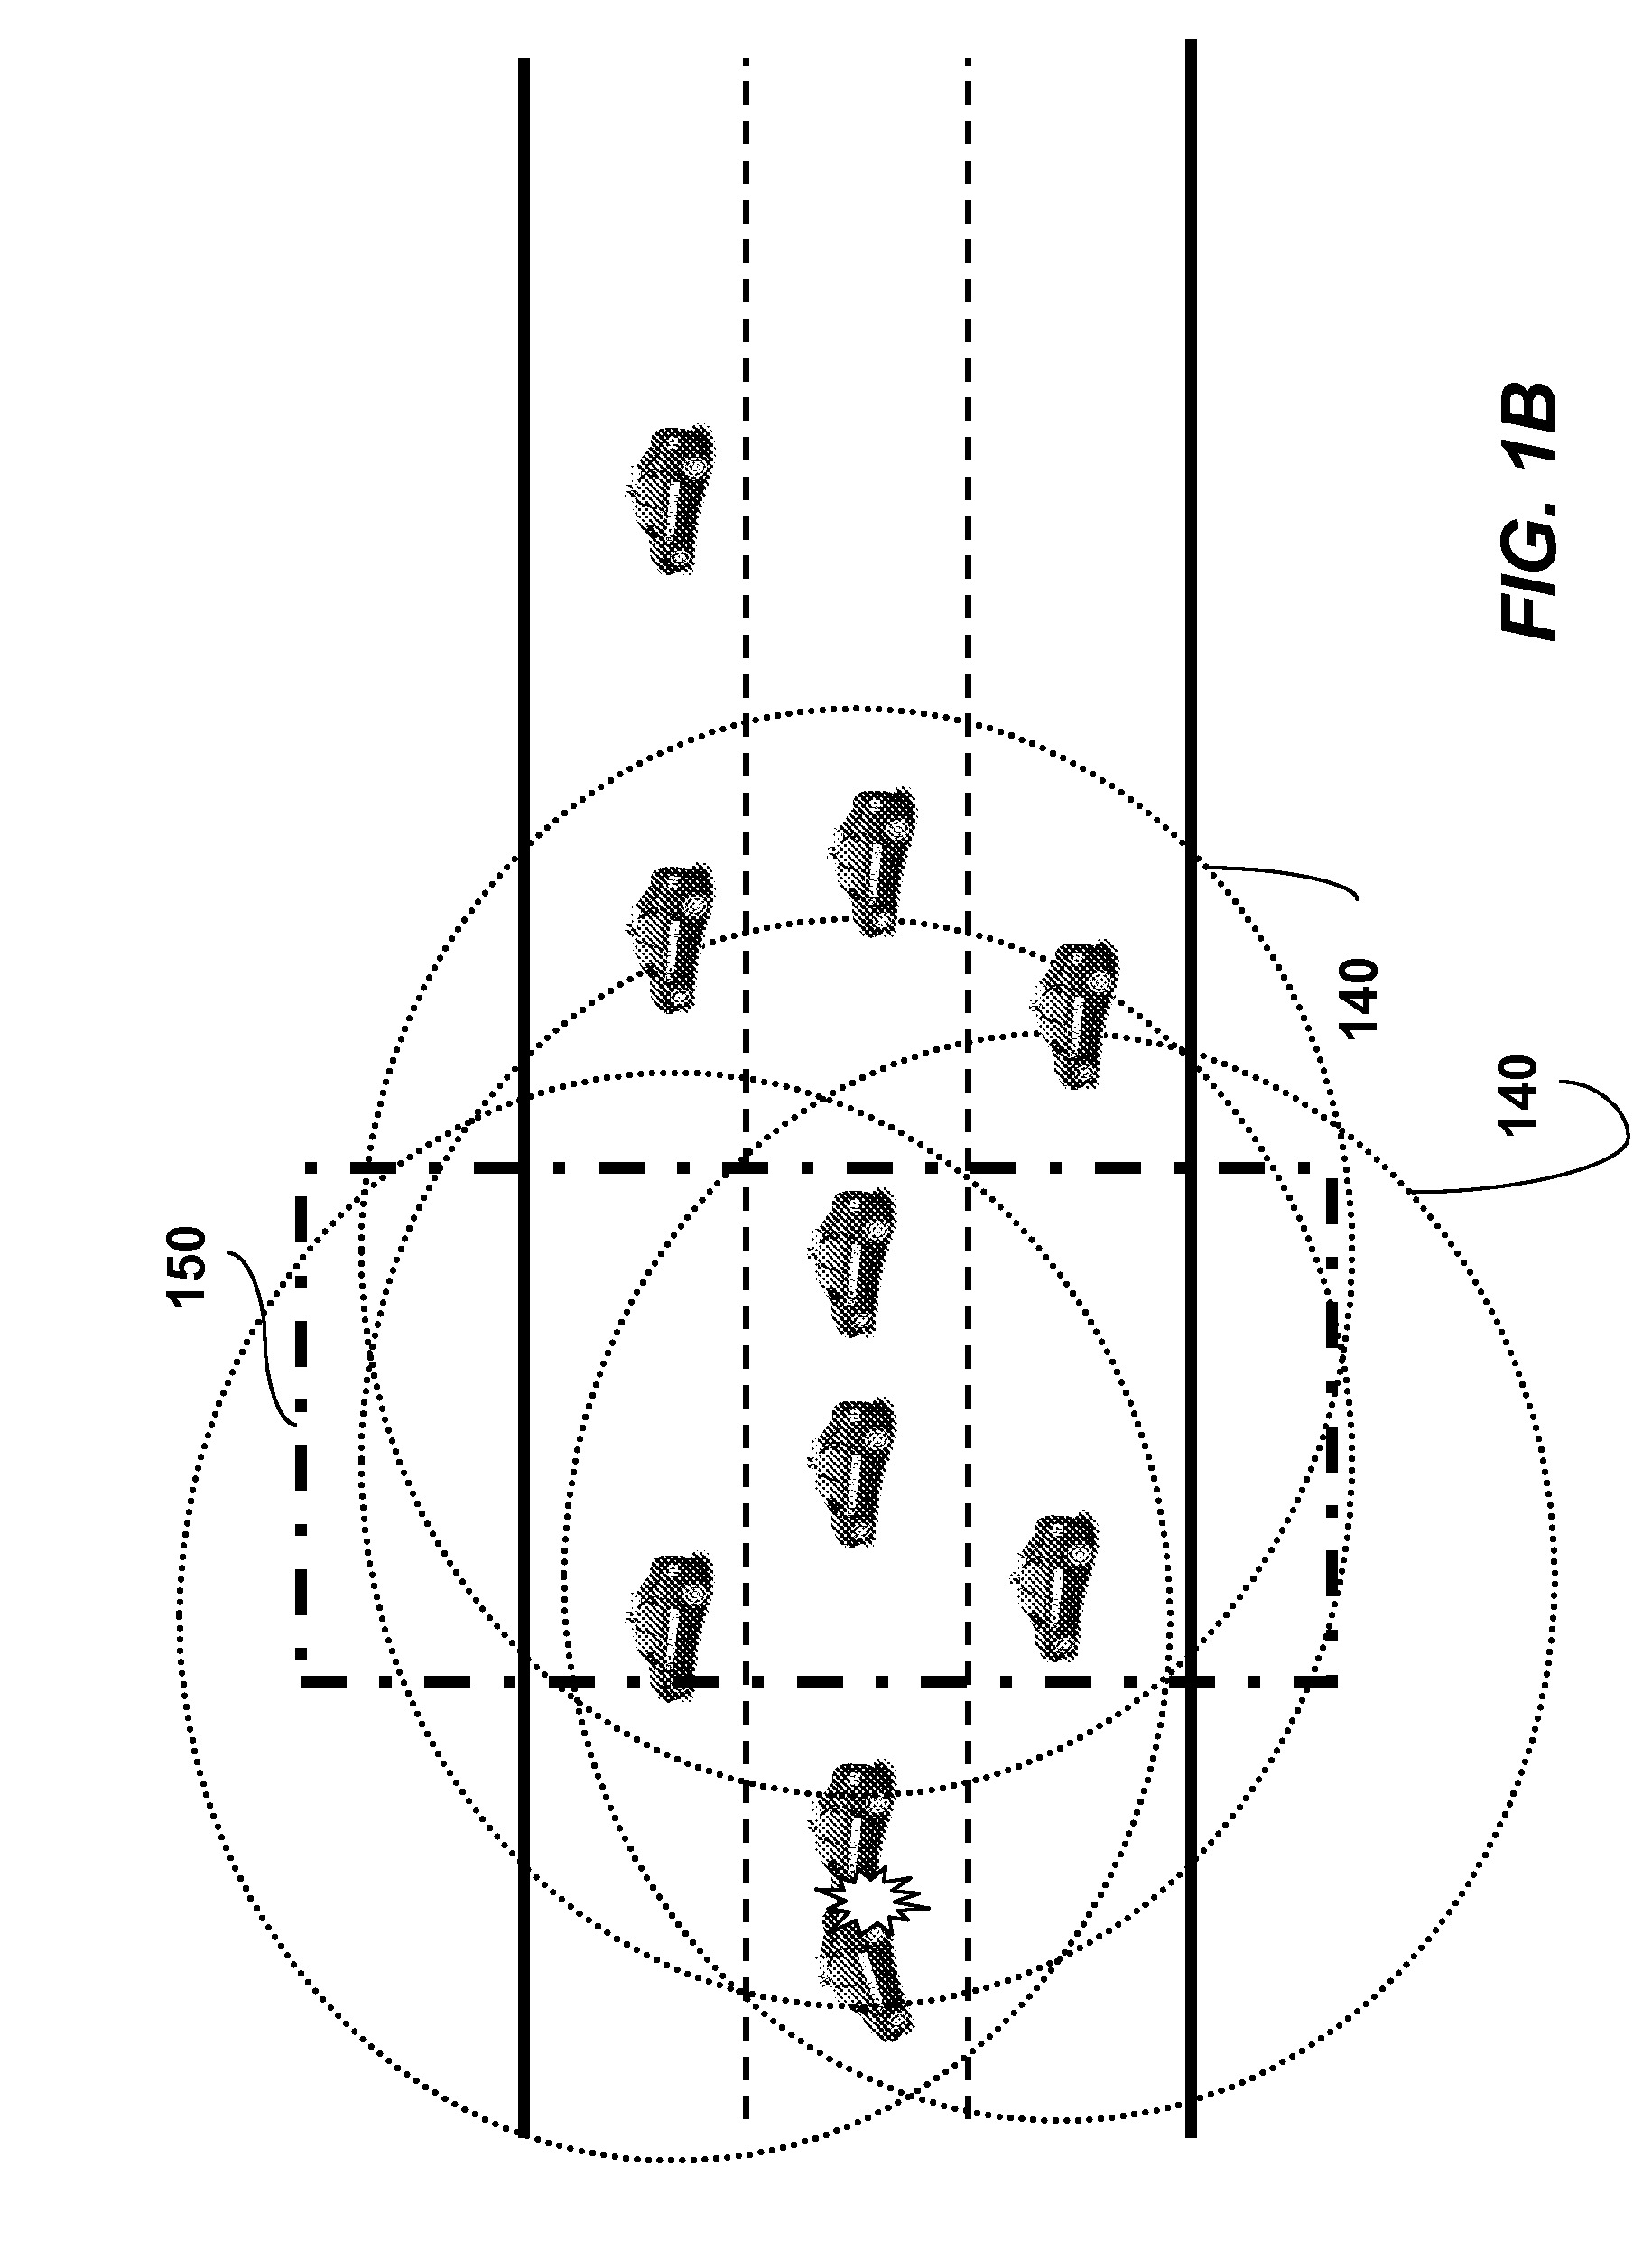 Method for Broadcasting Alert Message in Mobile Multi-Hop Networks Using Inferred Distance Prioritization